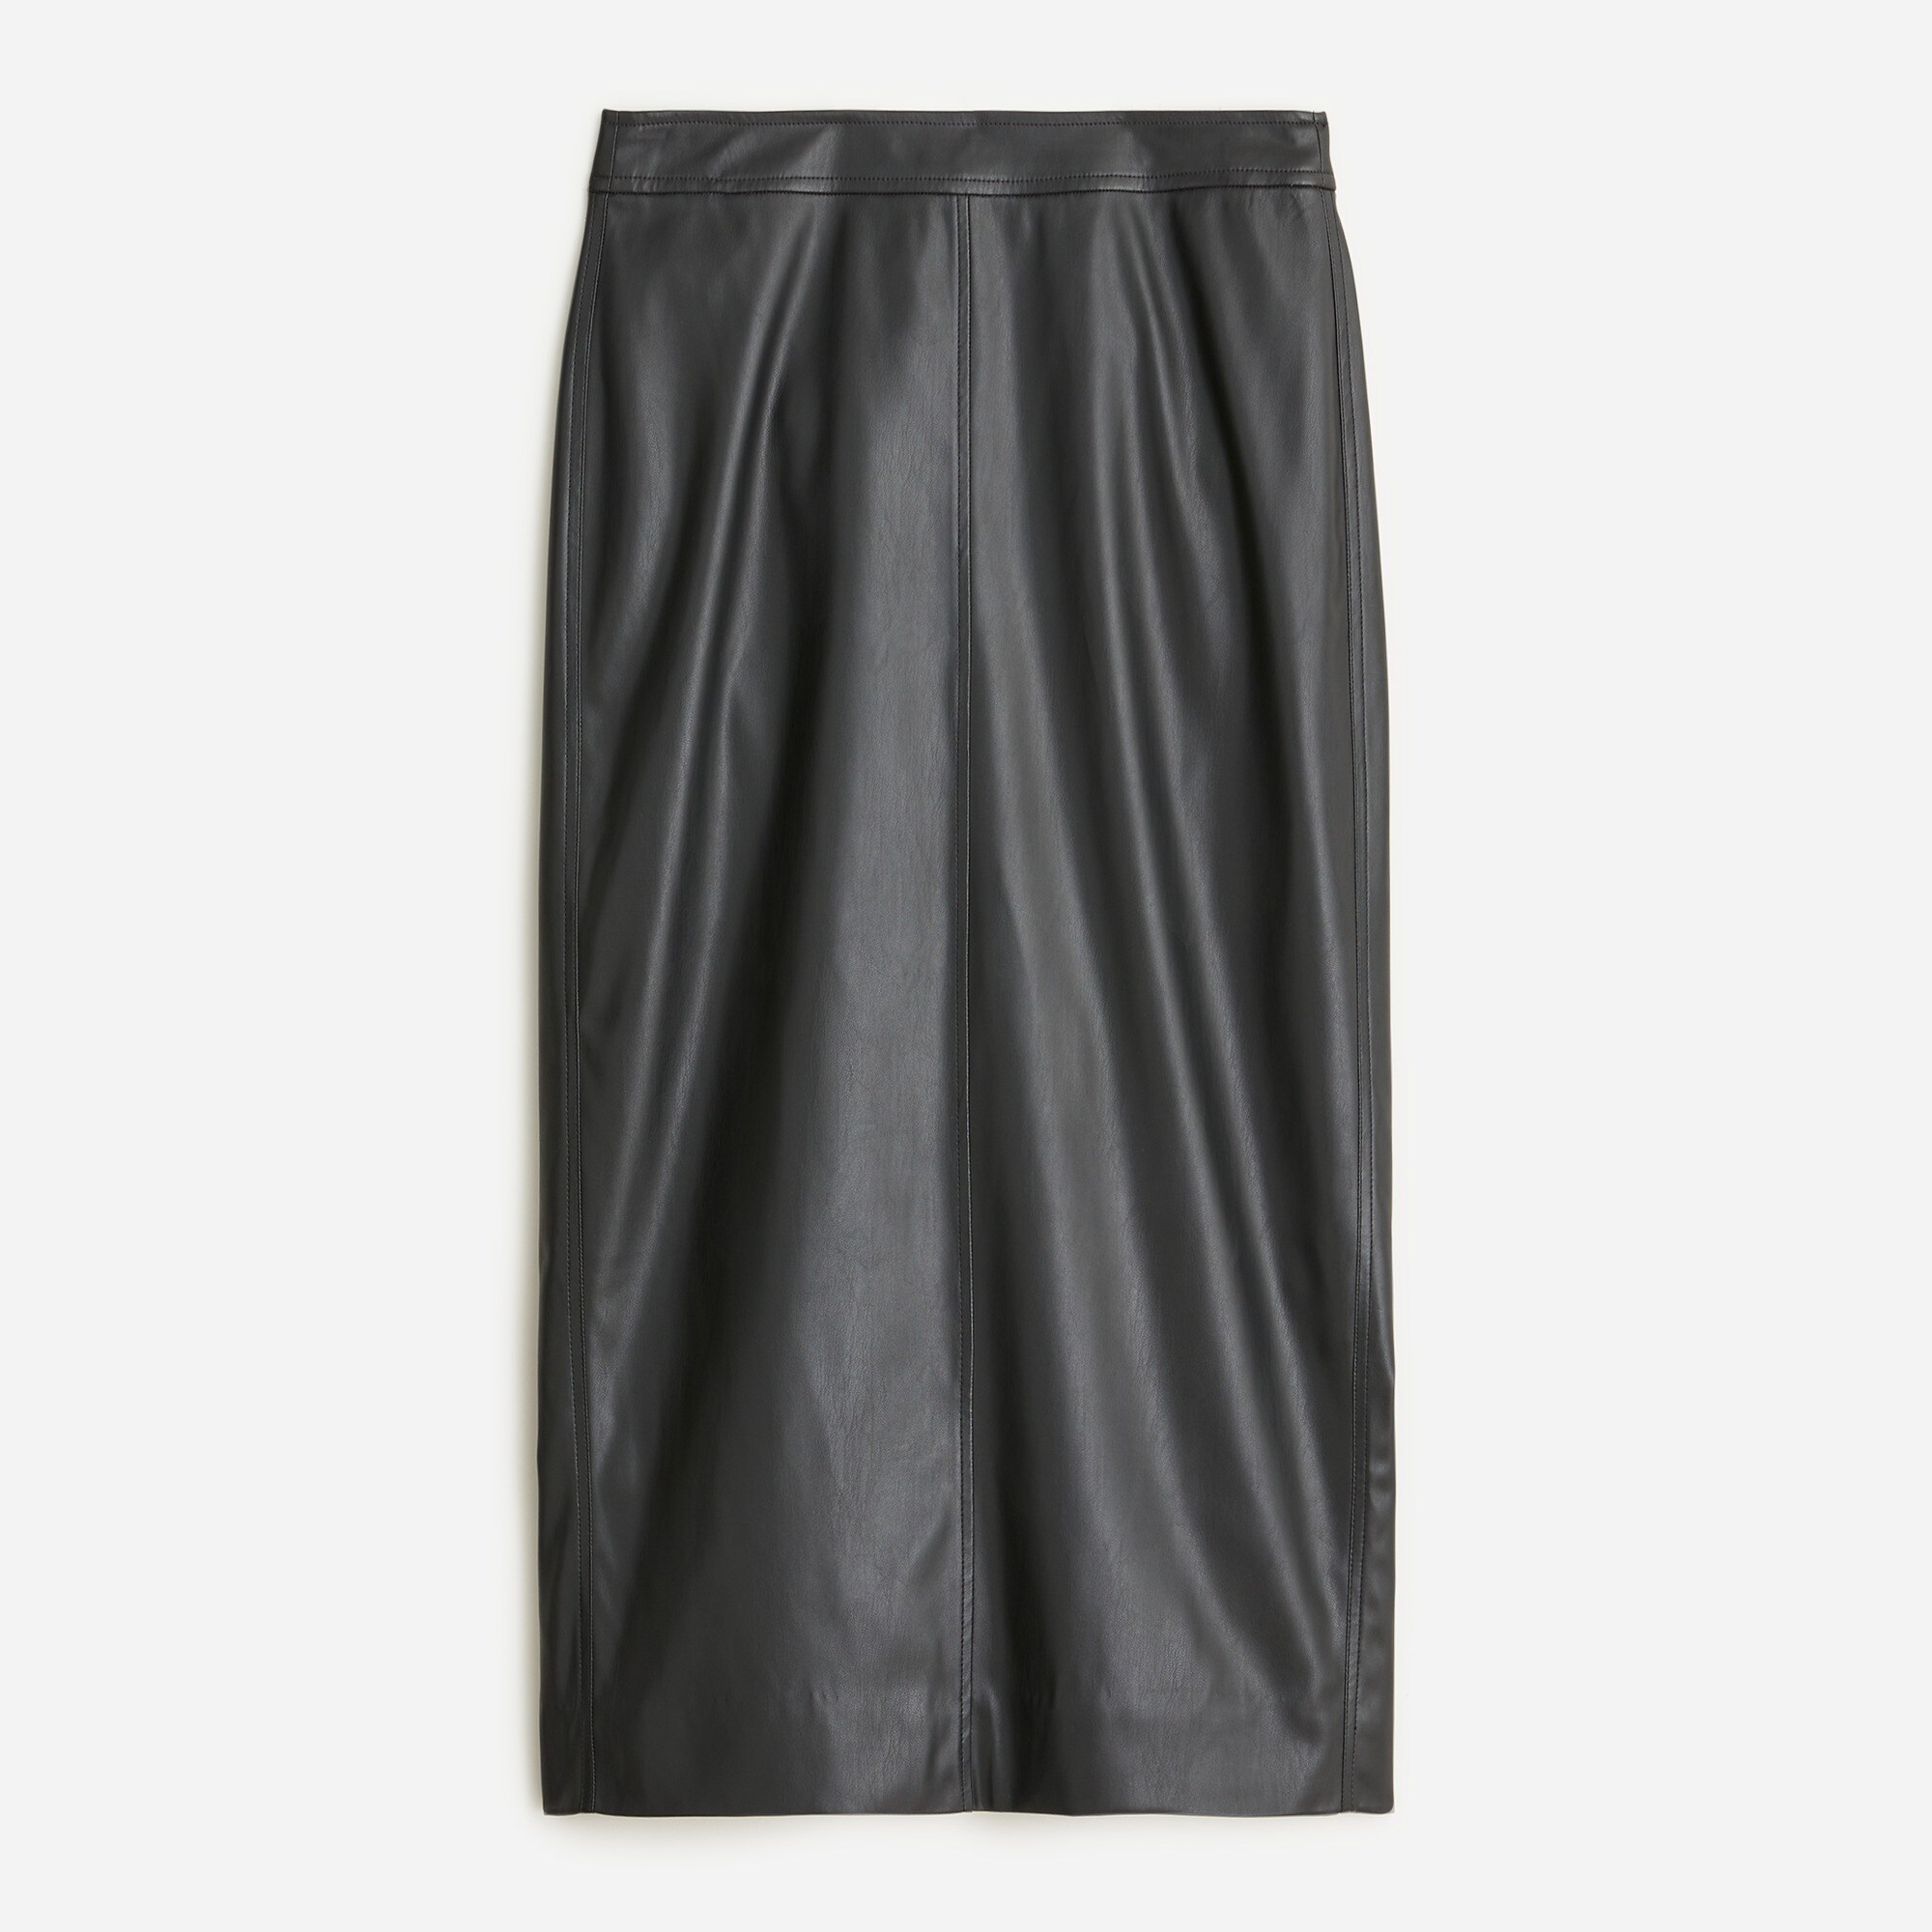  No. 3 Pencil skirt in faux leather